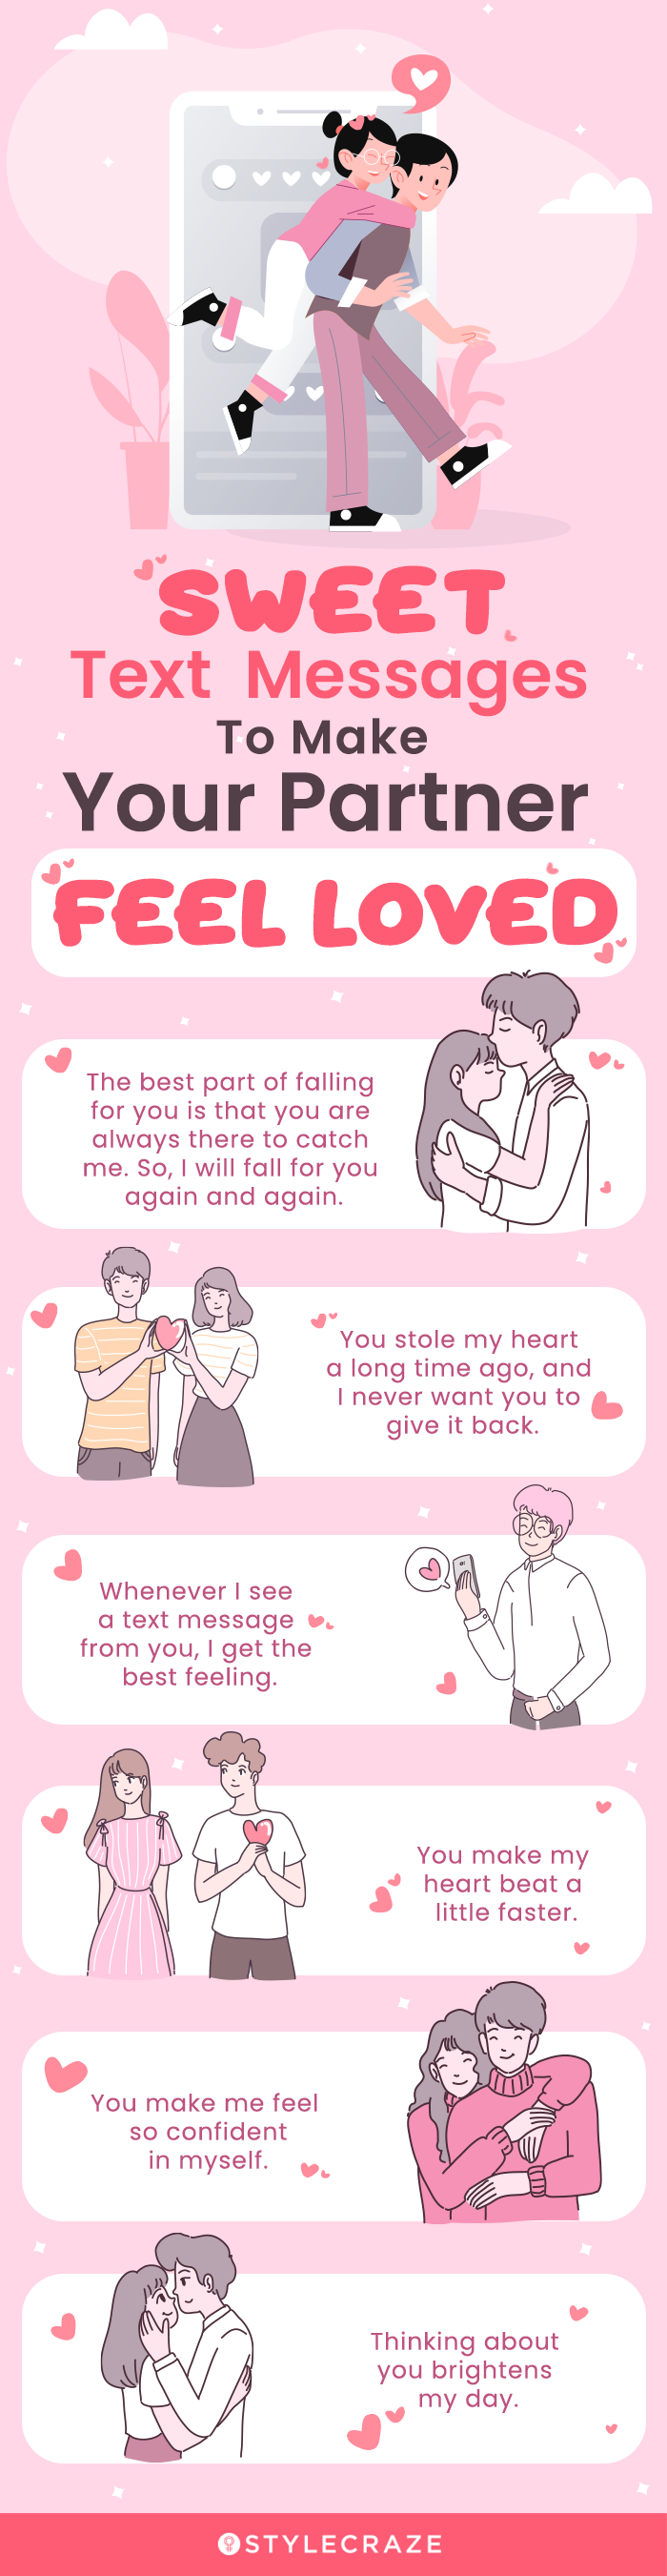 sweet text messages to make your partner feel loved [infographic]